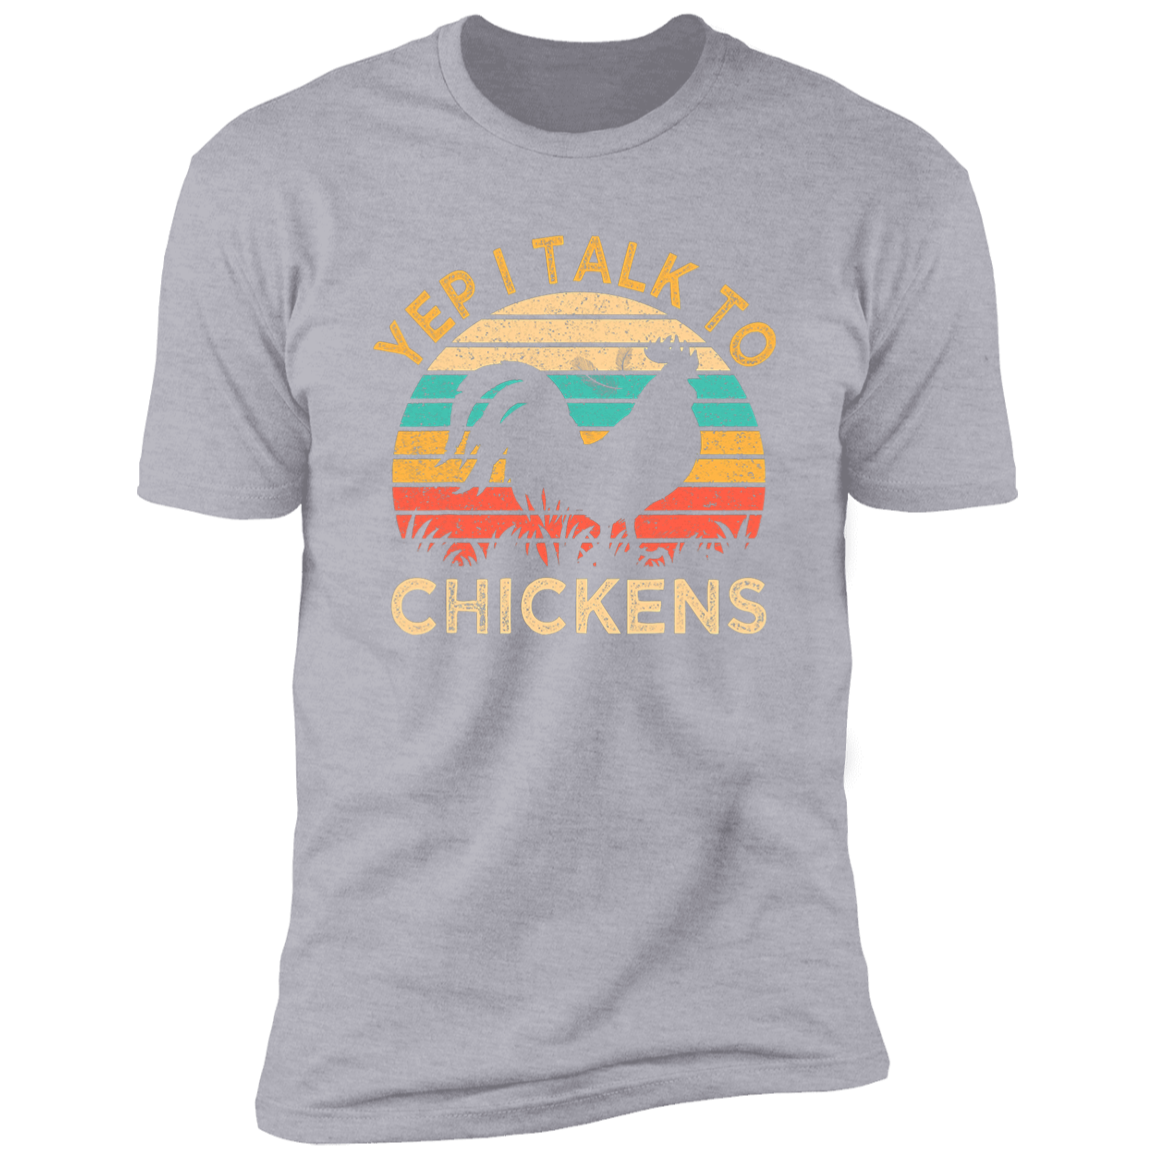 Chickens Vintage Funny Short Sleeve T-Shirt